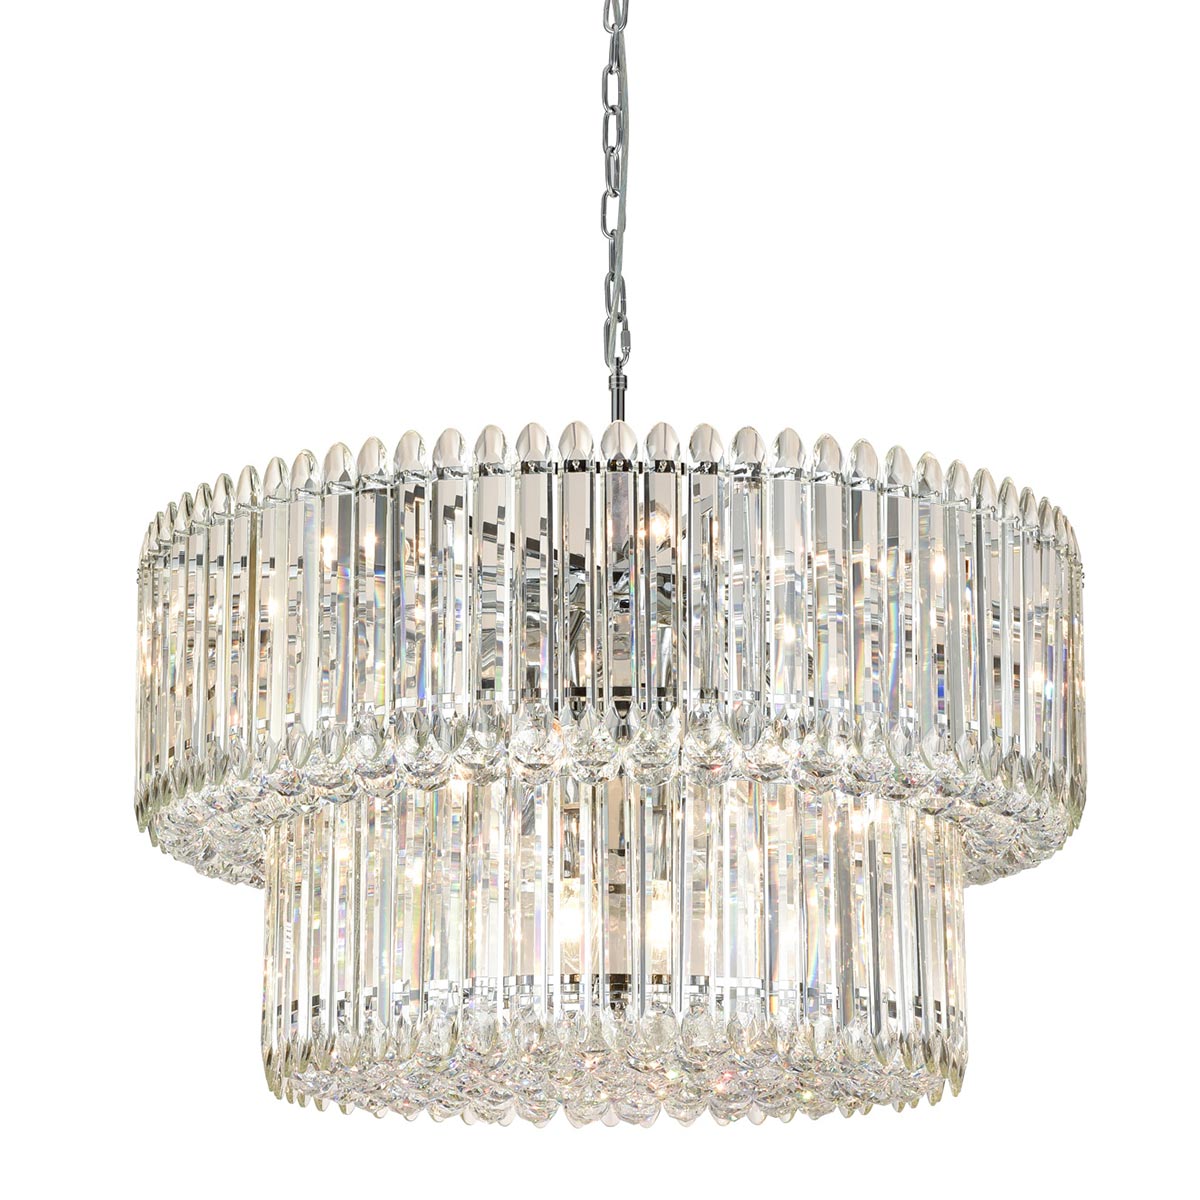 Classic Quality 20 Light 2 Tier Luxury Crystal Chandelier Polished Chrome